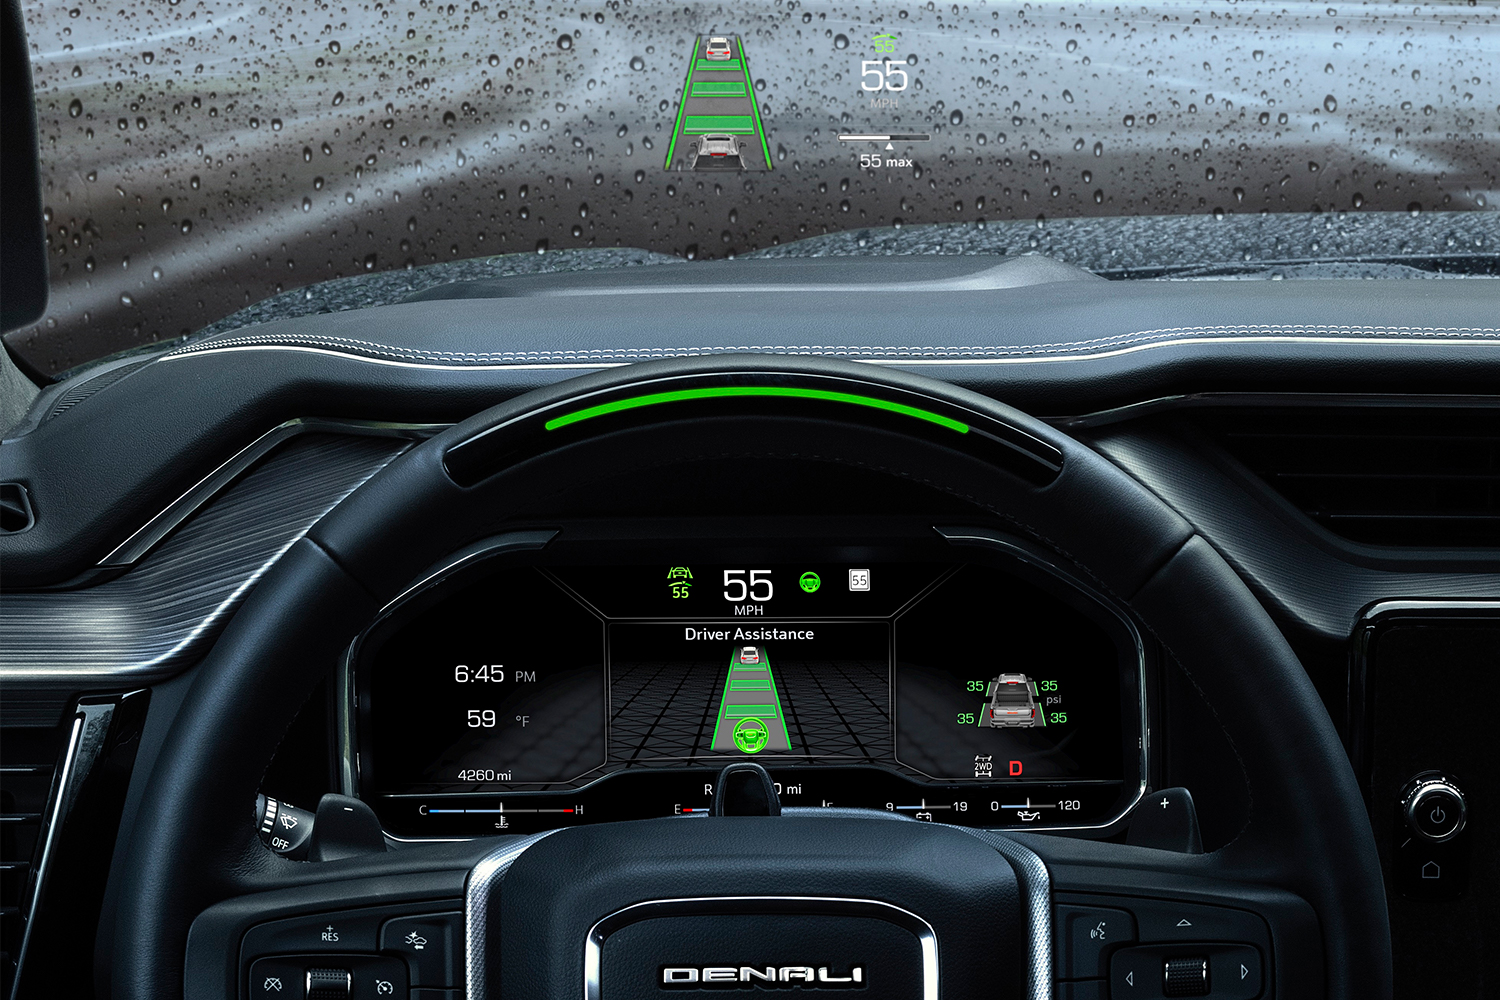 The Super Cruise technology and head-up display displayed on the dashboard and windshield of the GMC Sierra Denali Ultimate pickup truck